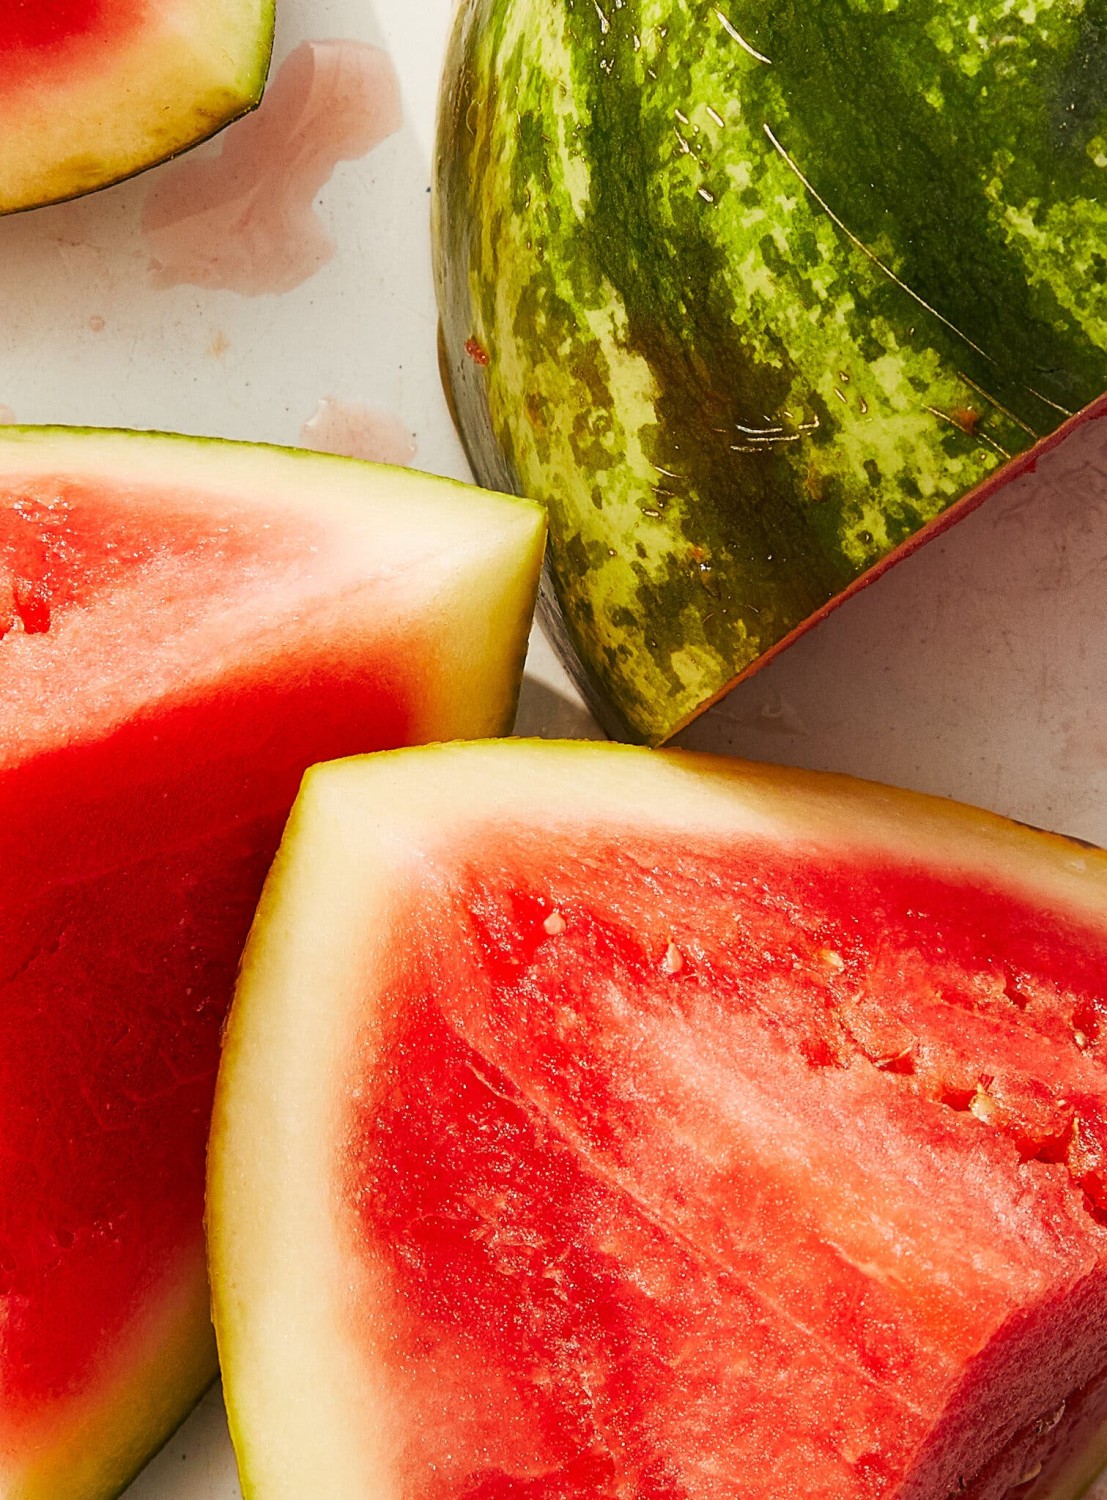 How Healthy Is Watermelon?